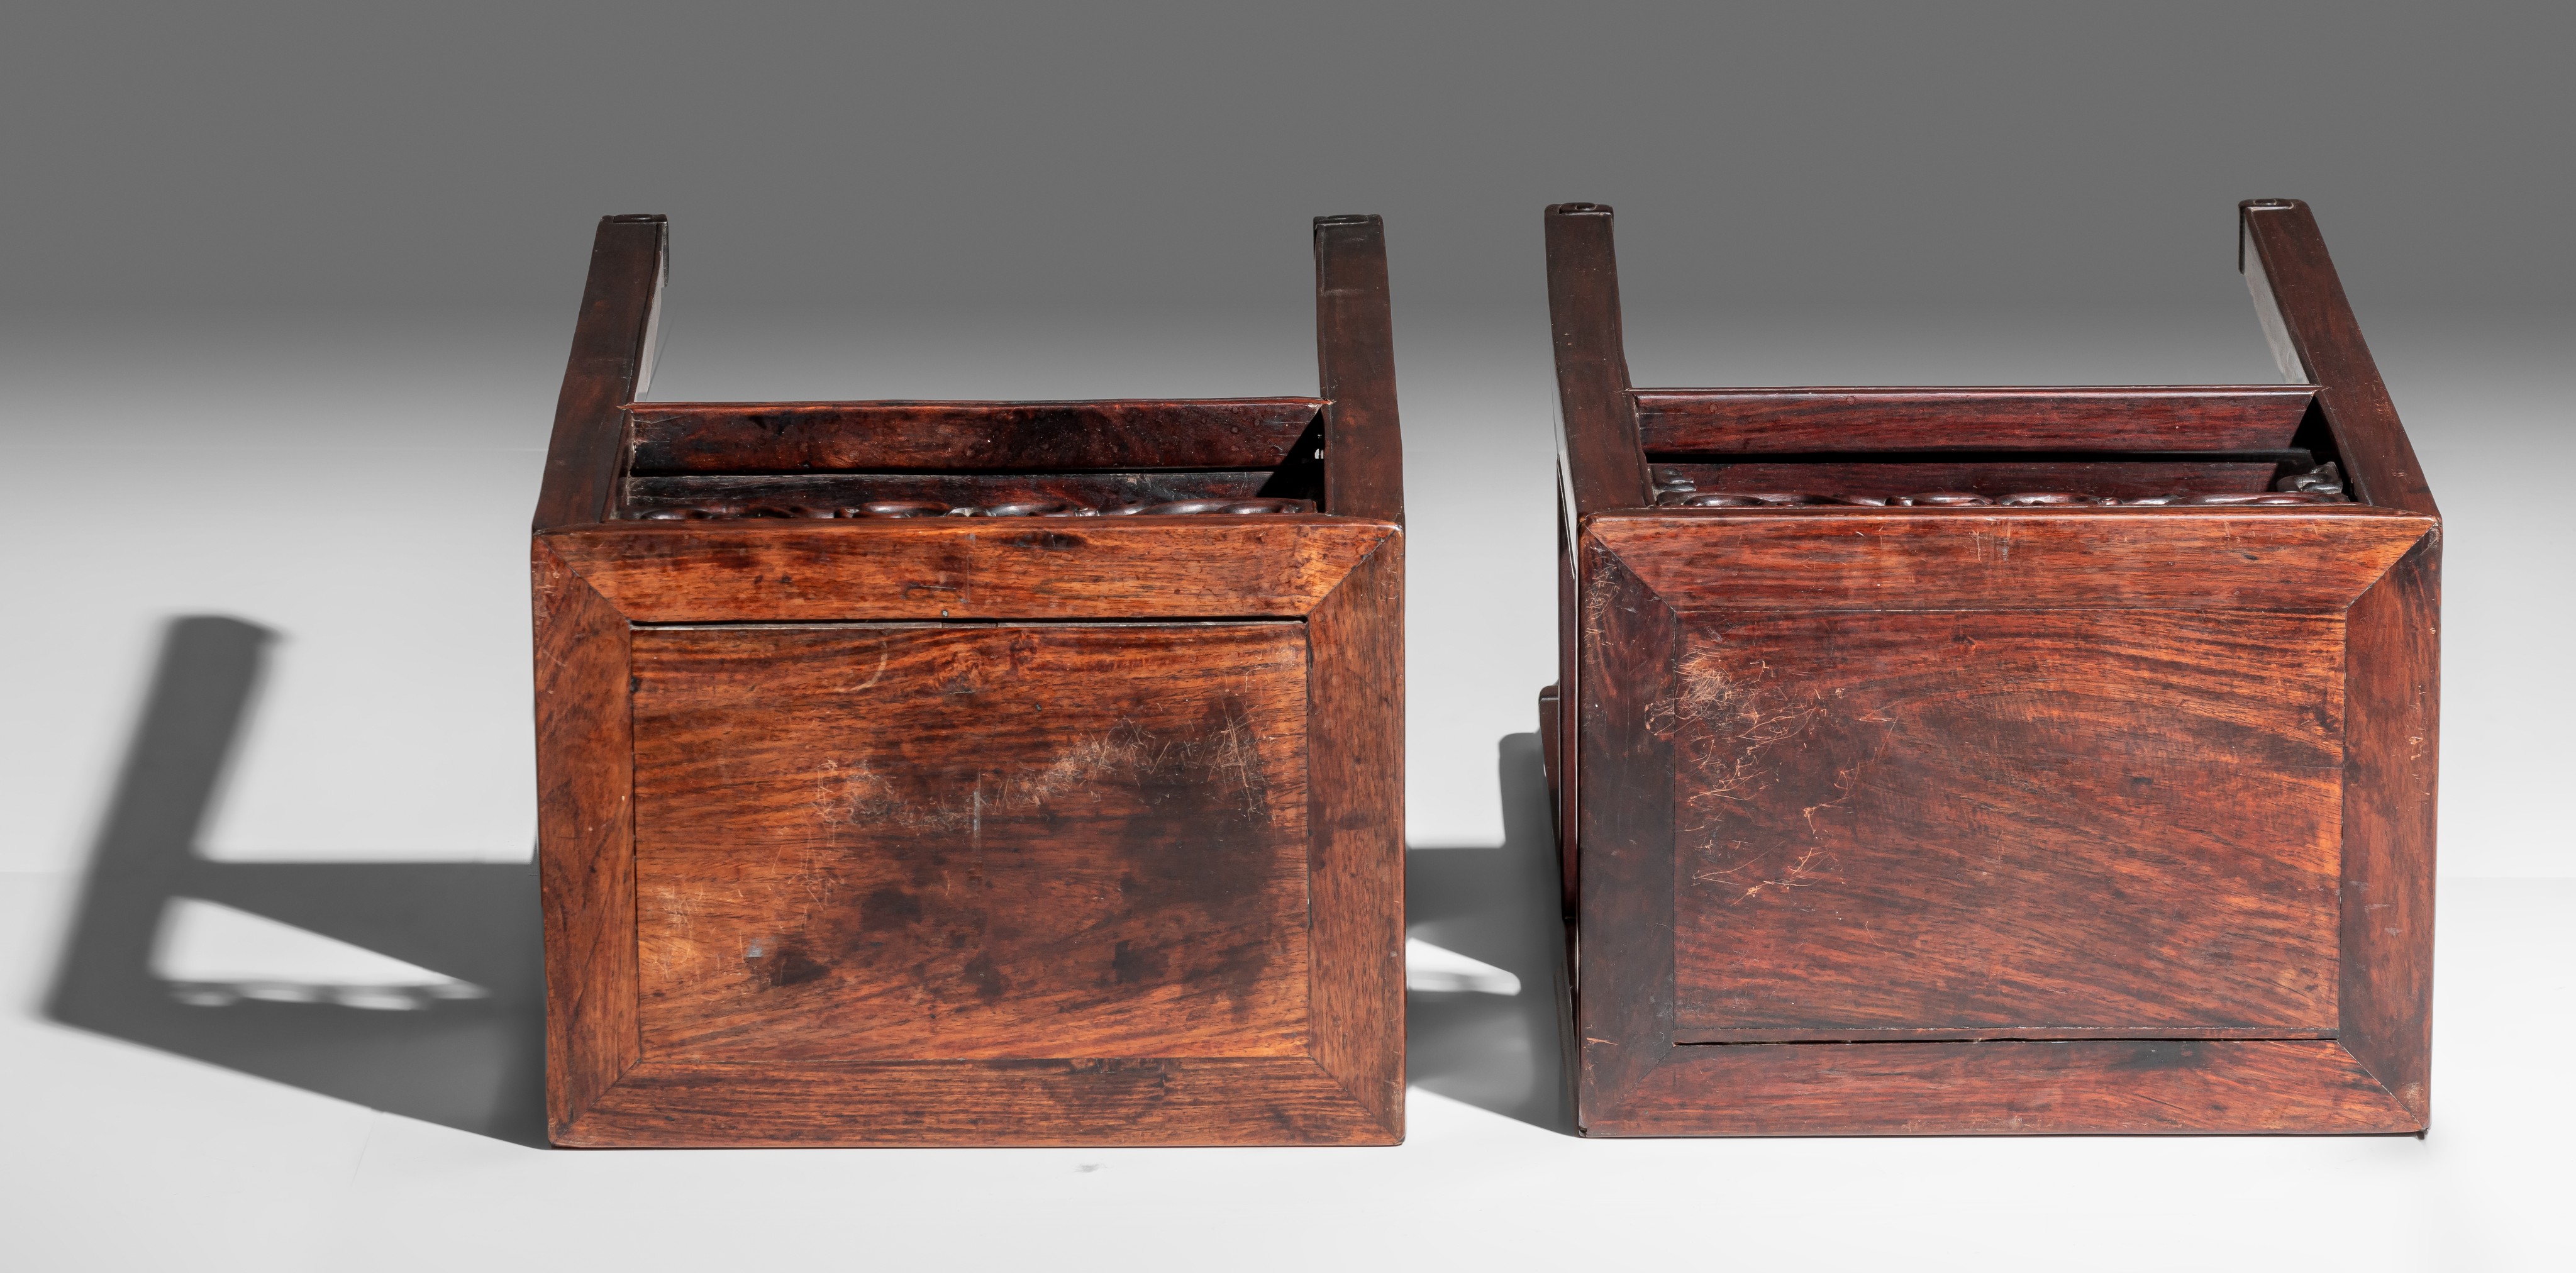 A pair of Chinese rosewood high stands, late Qing/Republic period, H 79,5 - 81 cm - Image 7 of 9